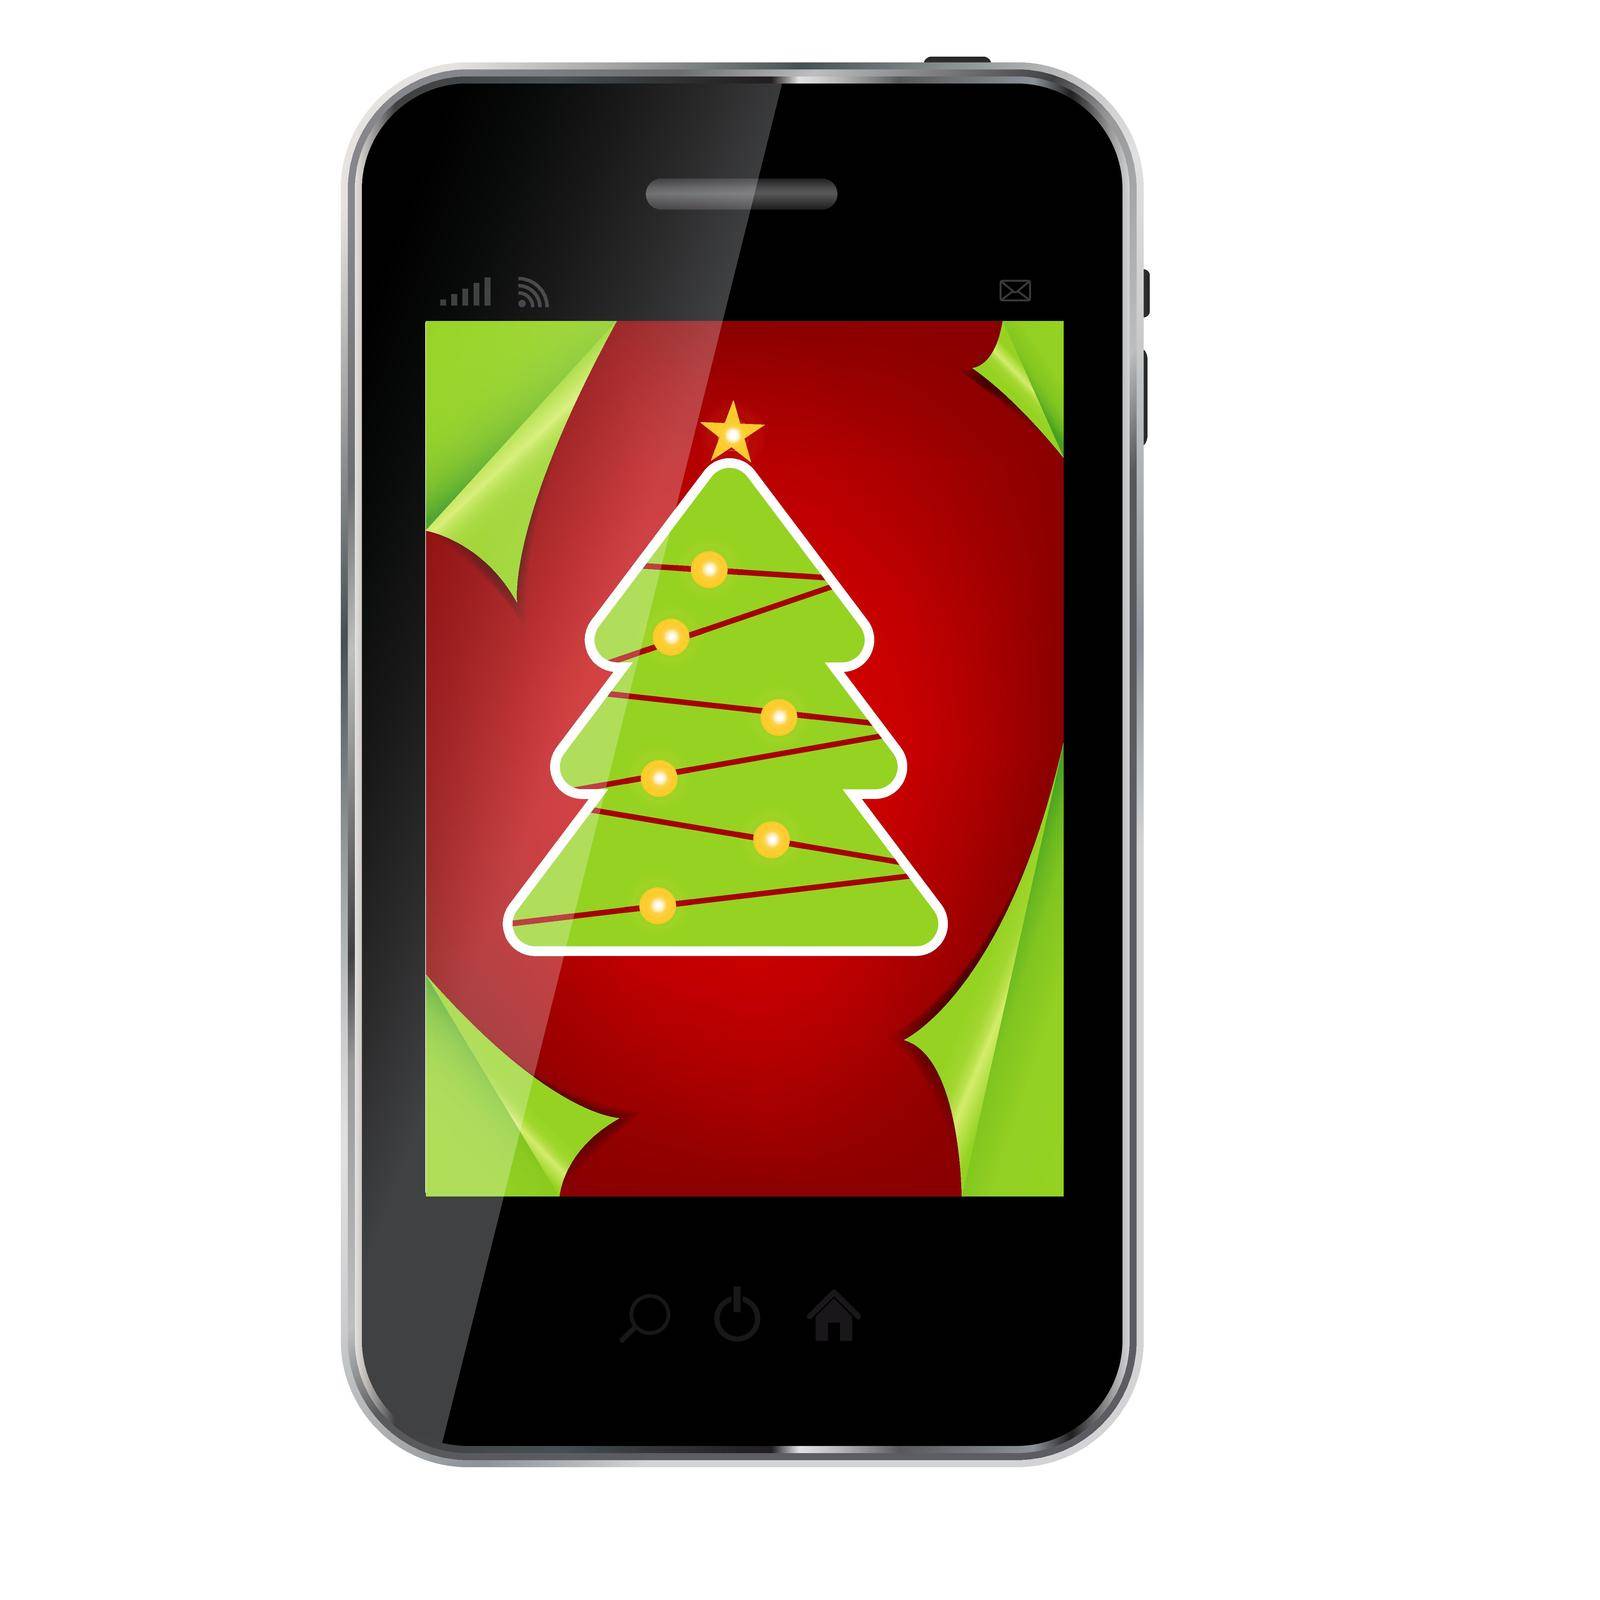 Abstract design mobile phone with Christmas background. vector illustration

